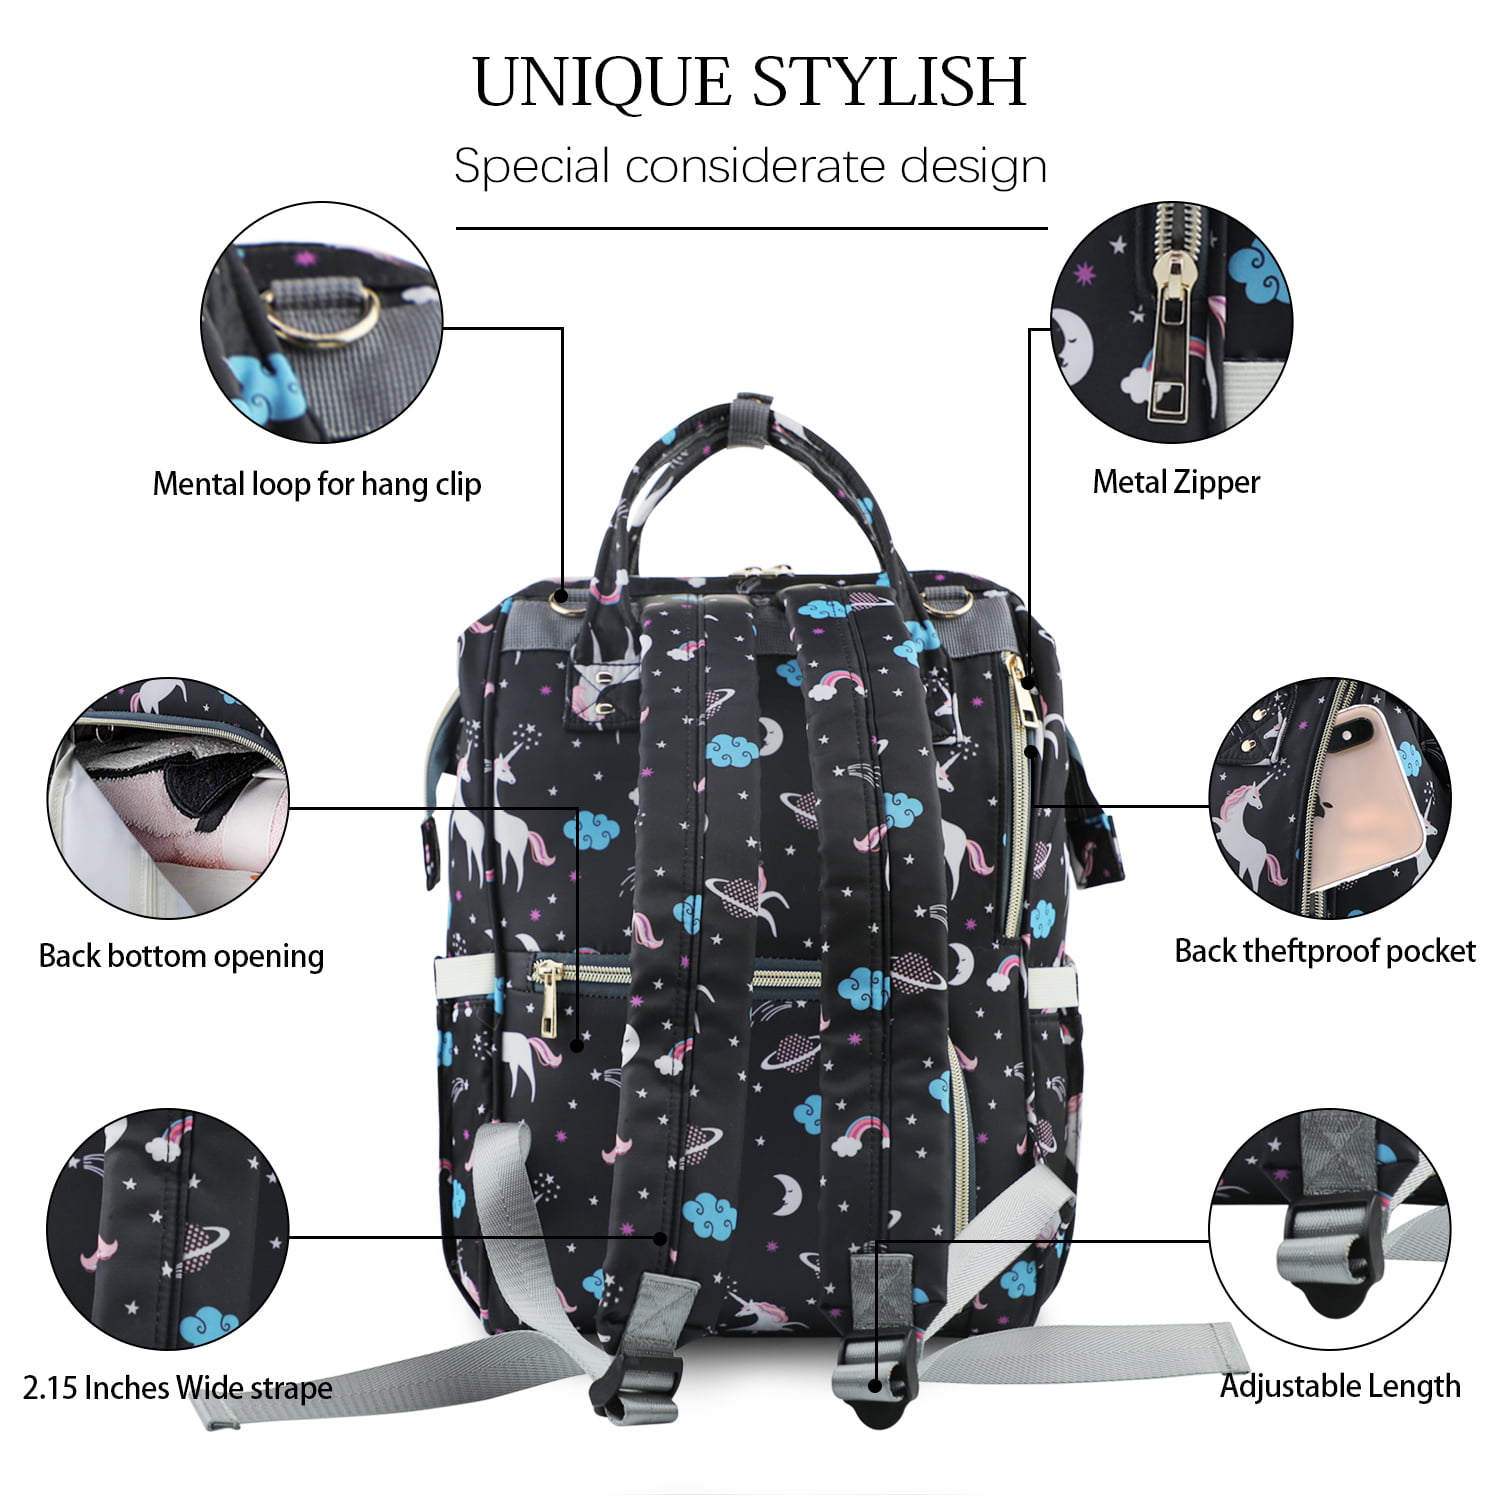 Anneunique Unicorn Starry Sky Diaper Bags Backpack with Name Personalized  Baby Bag Nursing Nappy Bag Travel Tote Bag Gifts for Mom Girl, 10.83 x 6.69